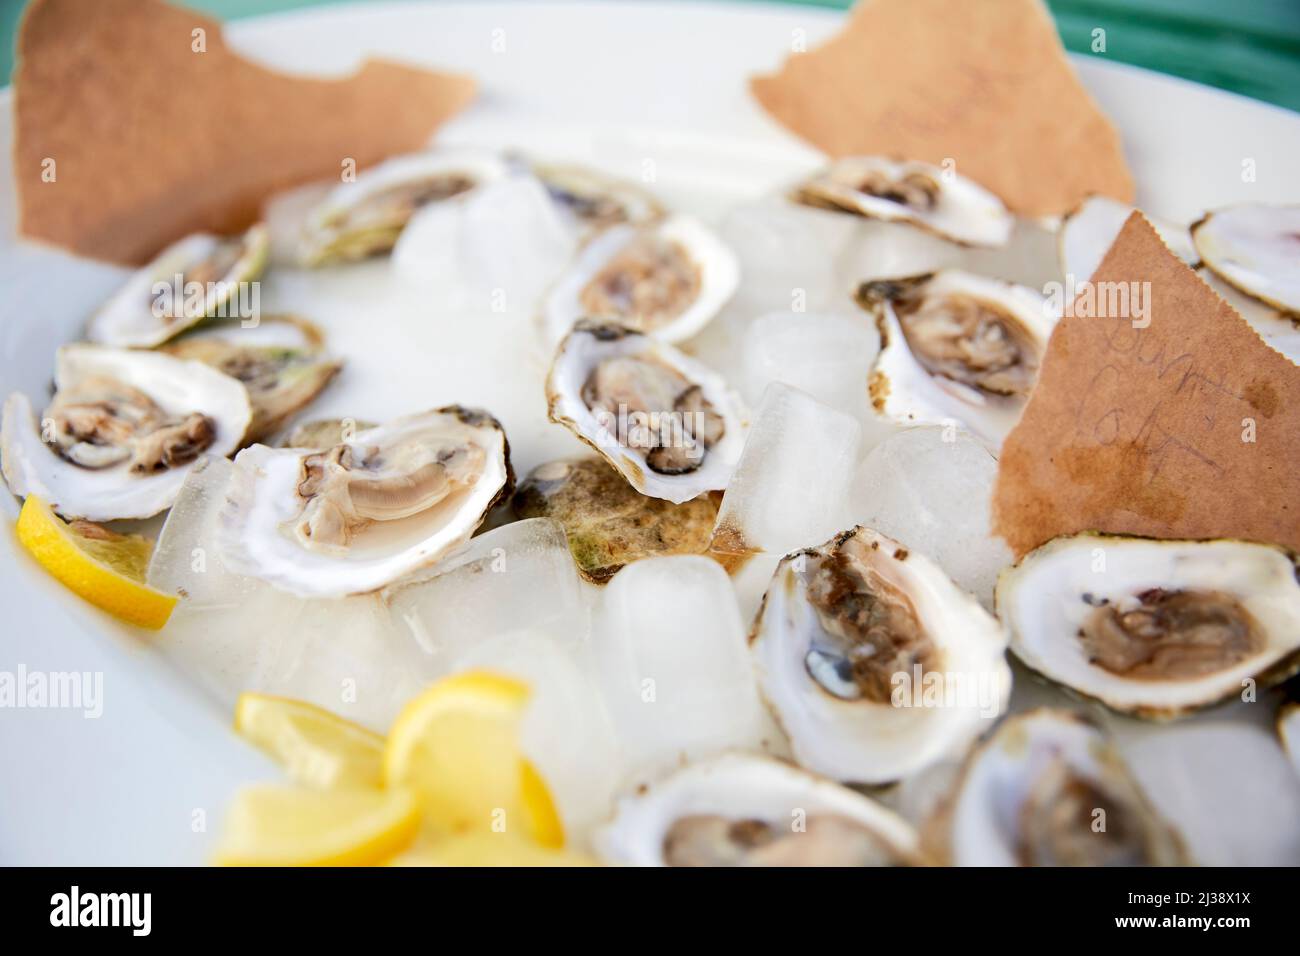 Sample Platter of Maine Oysters Stock Photo